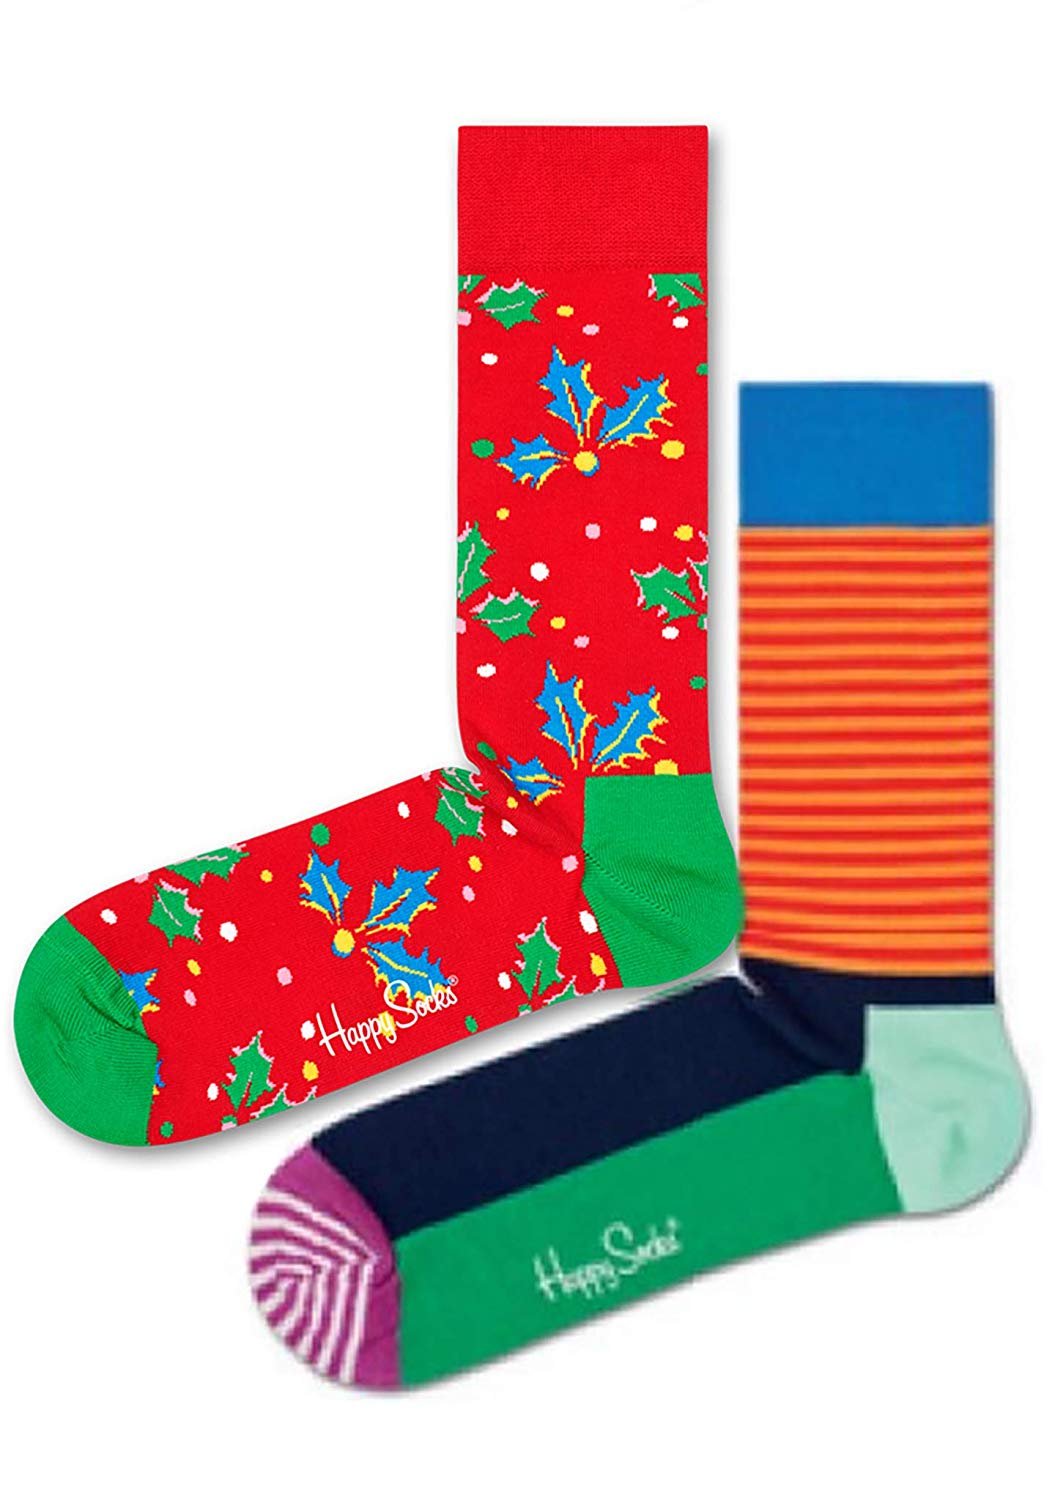 Psychedelic Holiday Socks 2 Pack Christmas Cracker